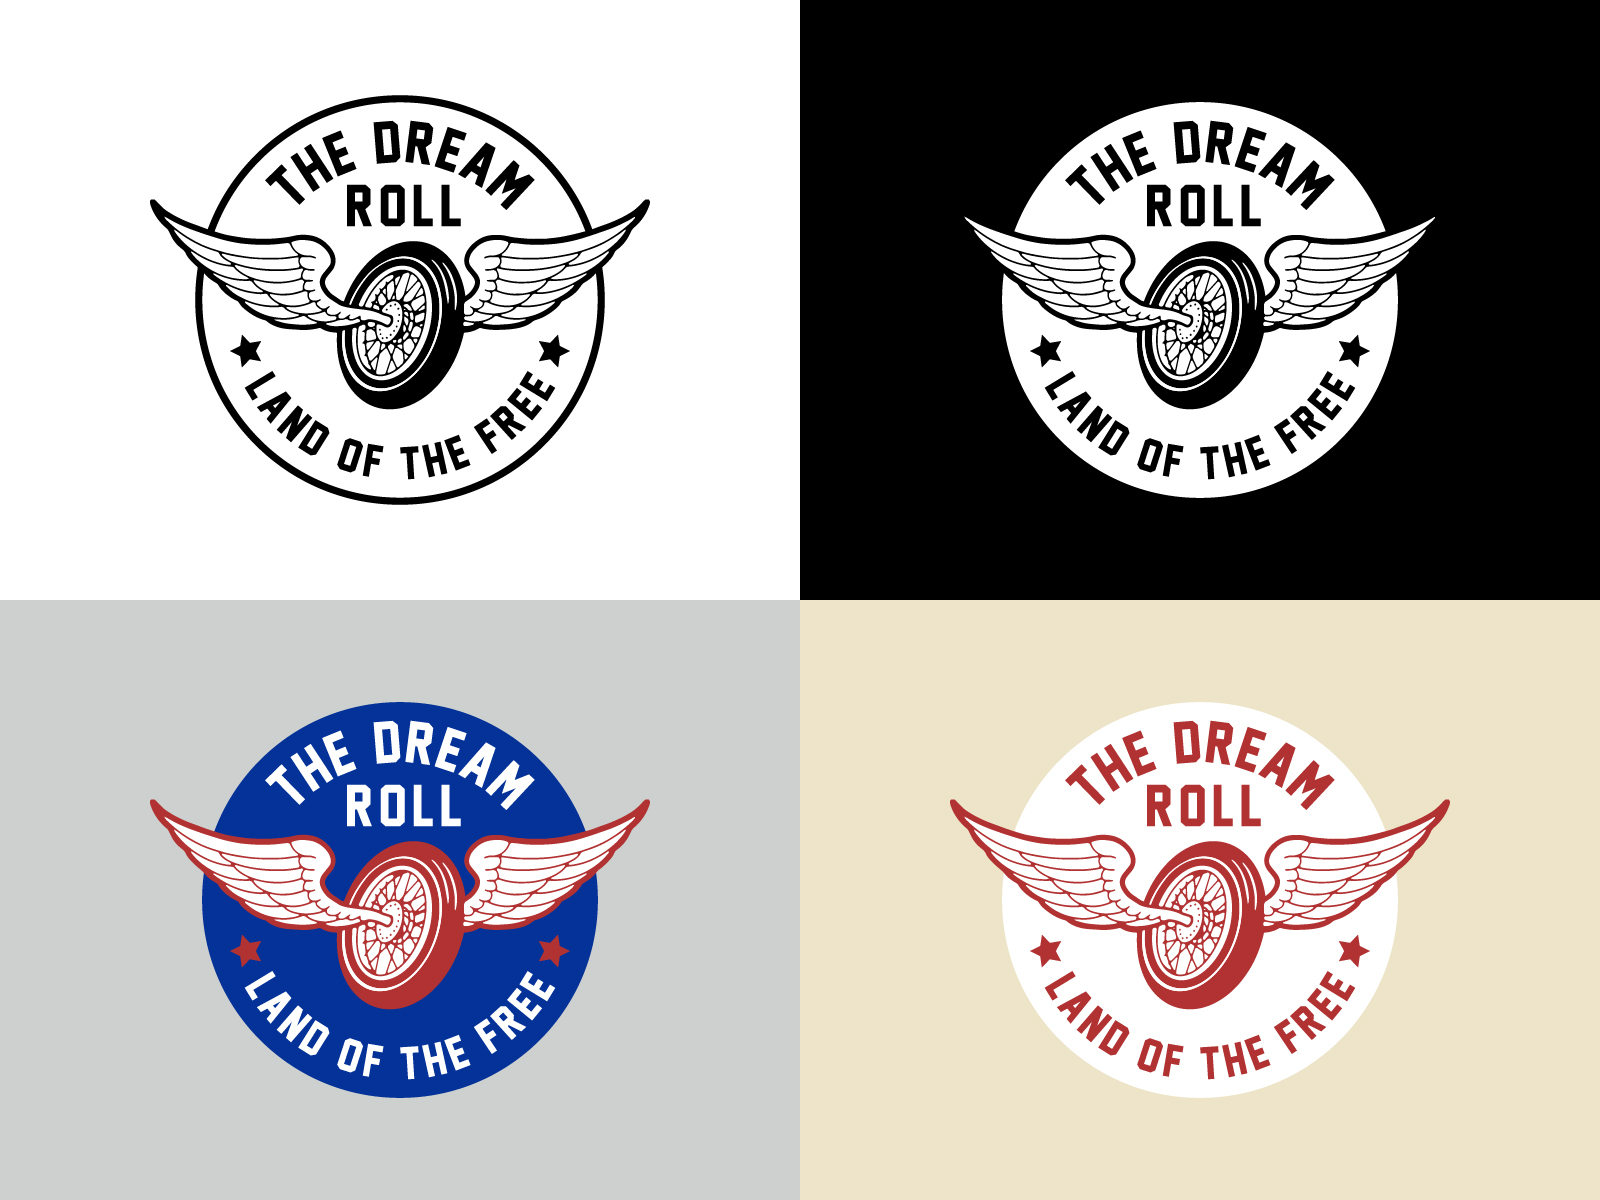 The Dream Roll Wing Badge Logo Variations by Mickey Graham on Dribbble